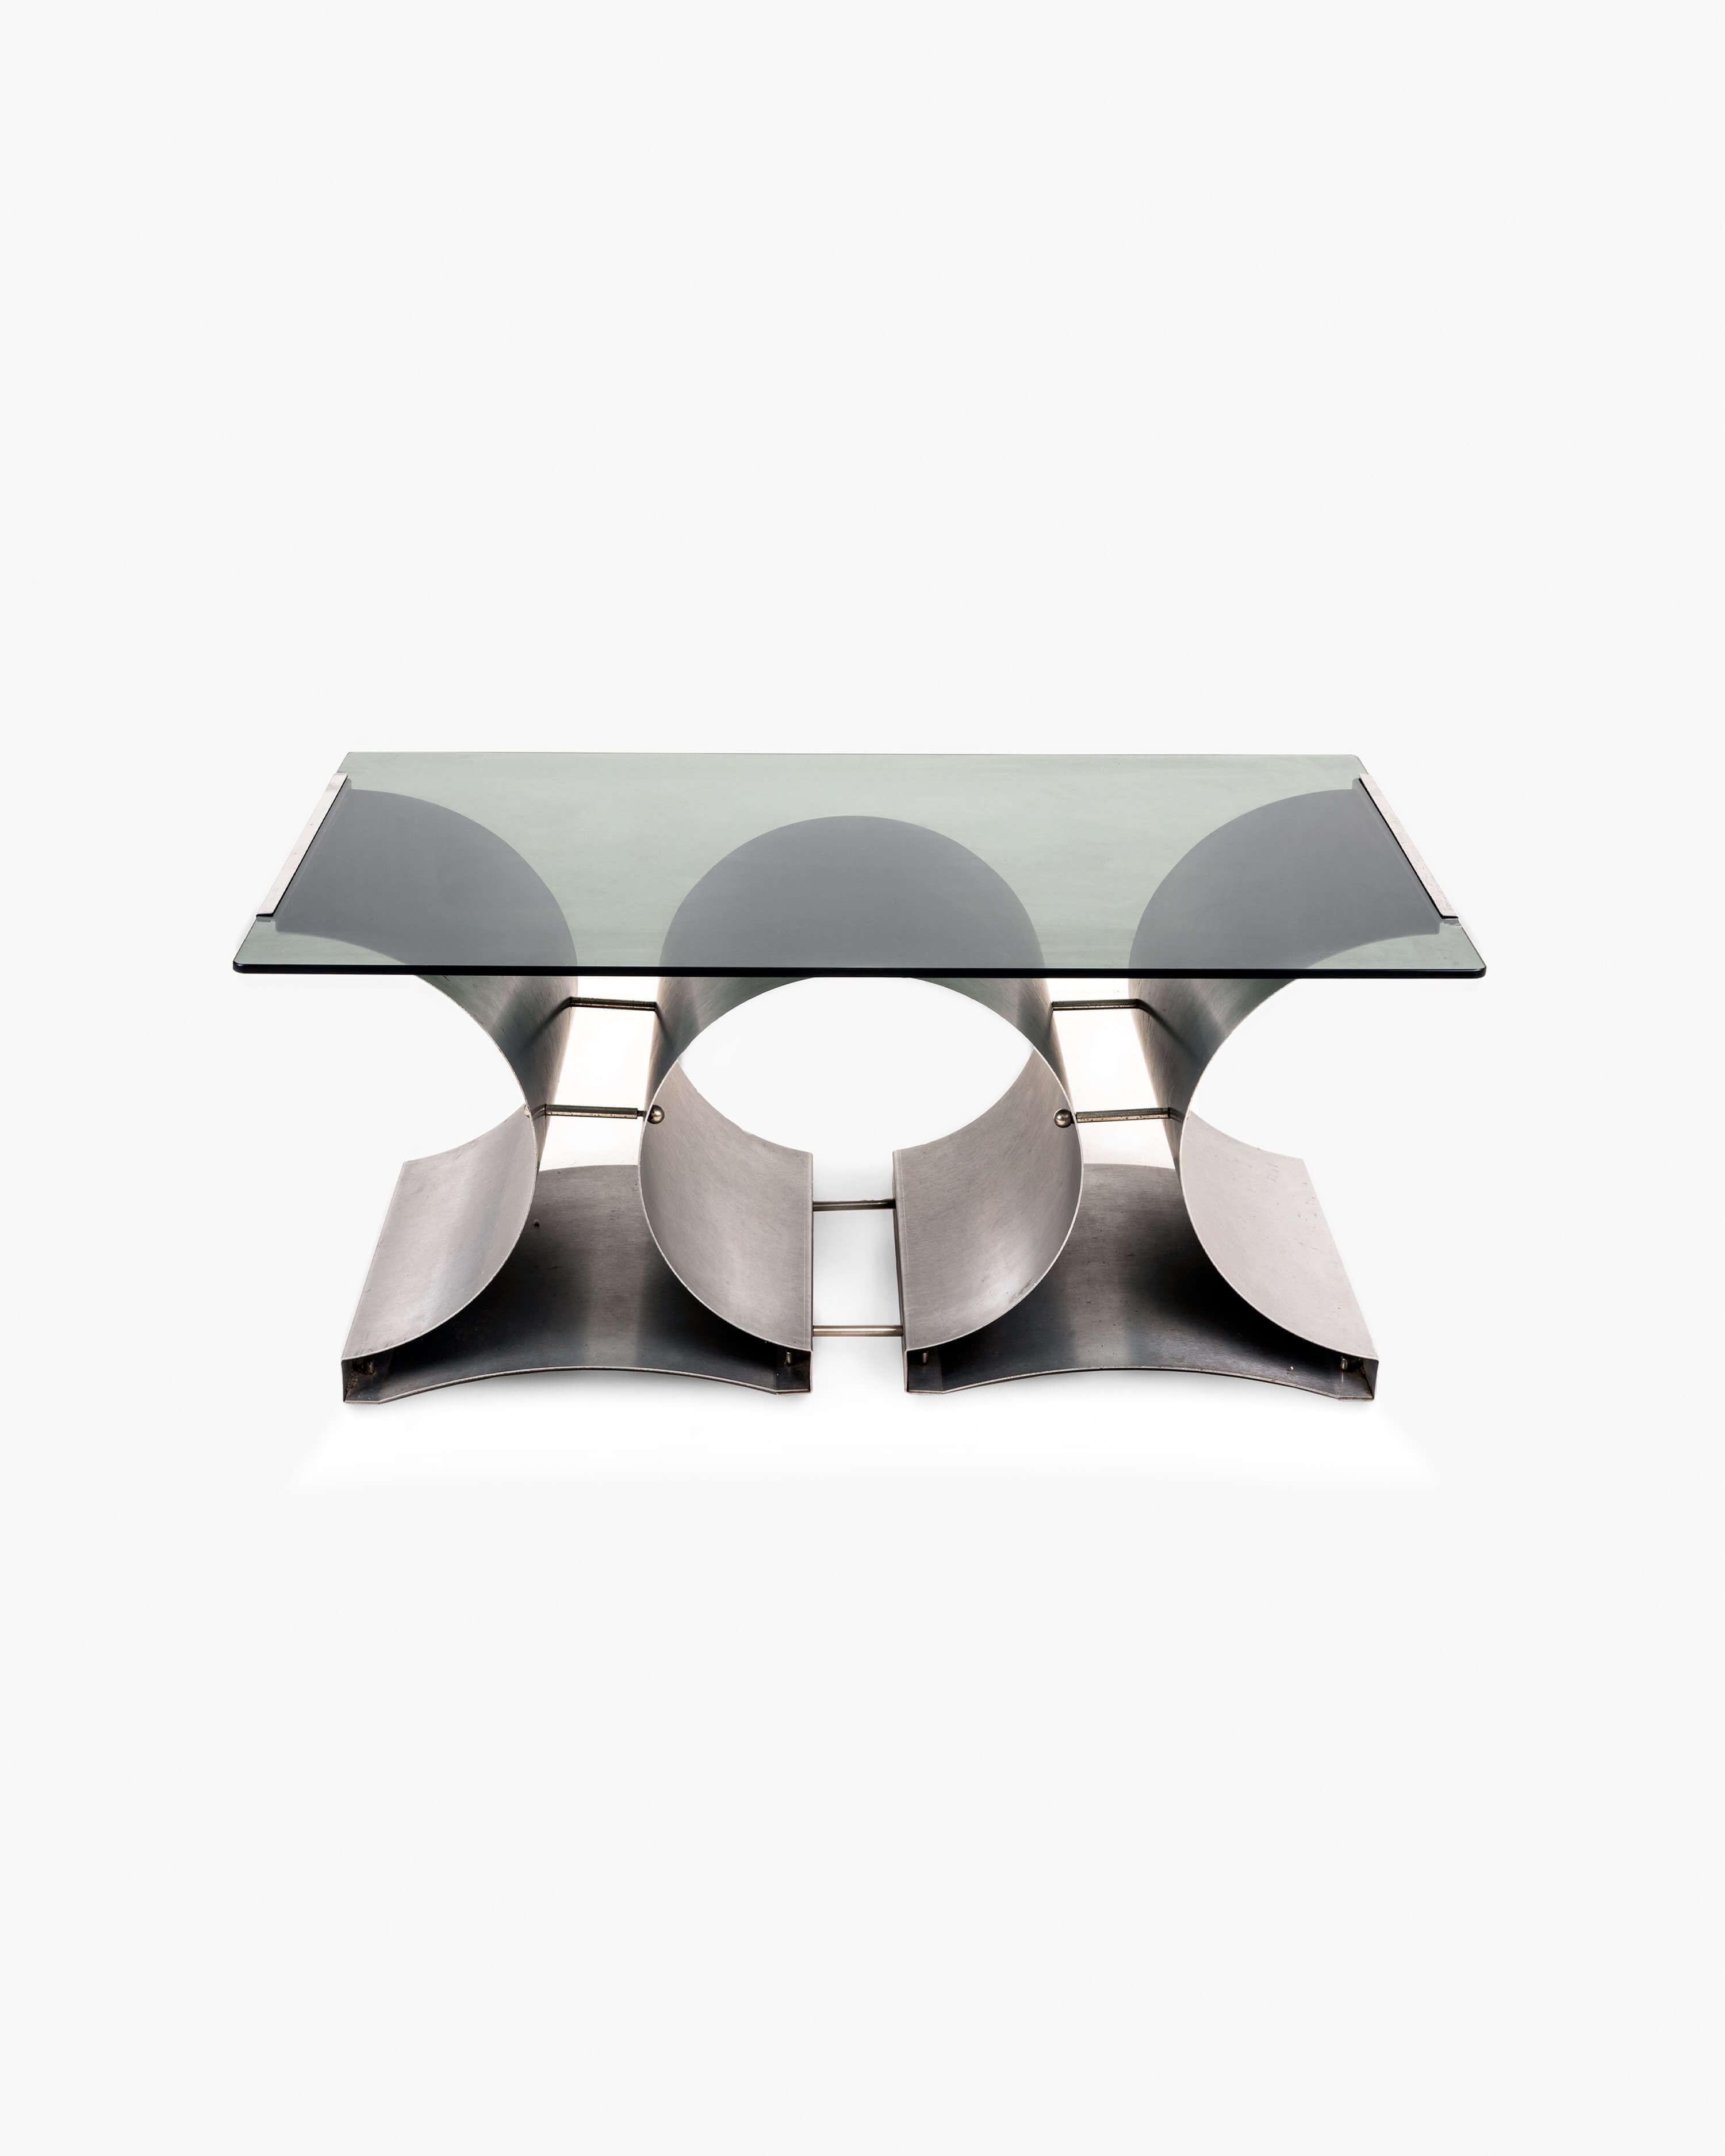 Experience the remarkable design of Francois Monnet with this coffee table for Kappa. Crafted in the 1970s, this table features a striking smoked glass top that perfectly complements its sleek steel base.

The tensioned steel sheets form a